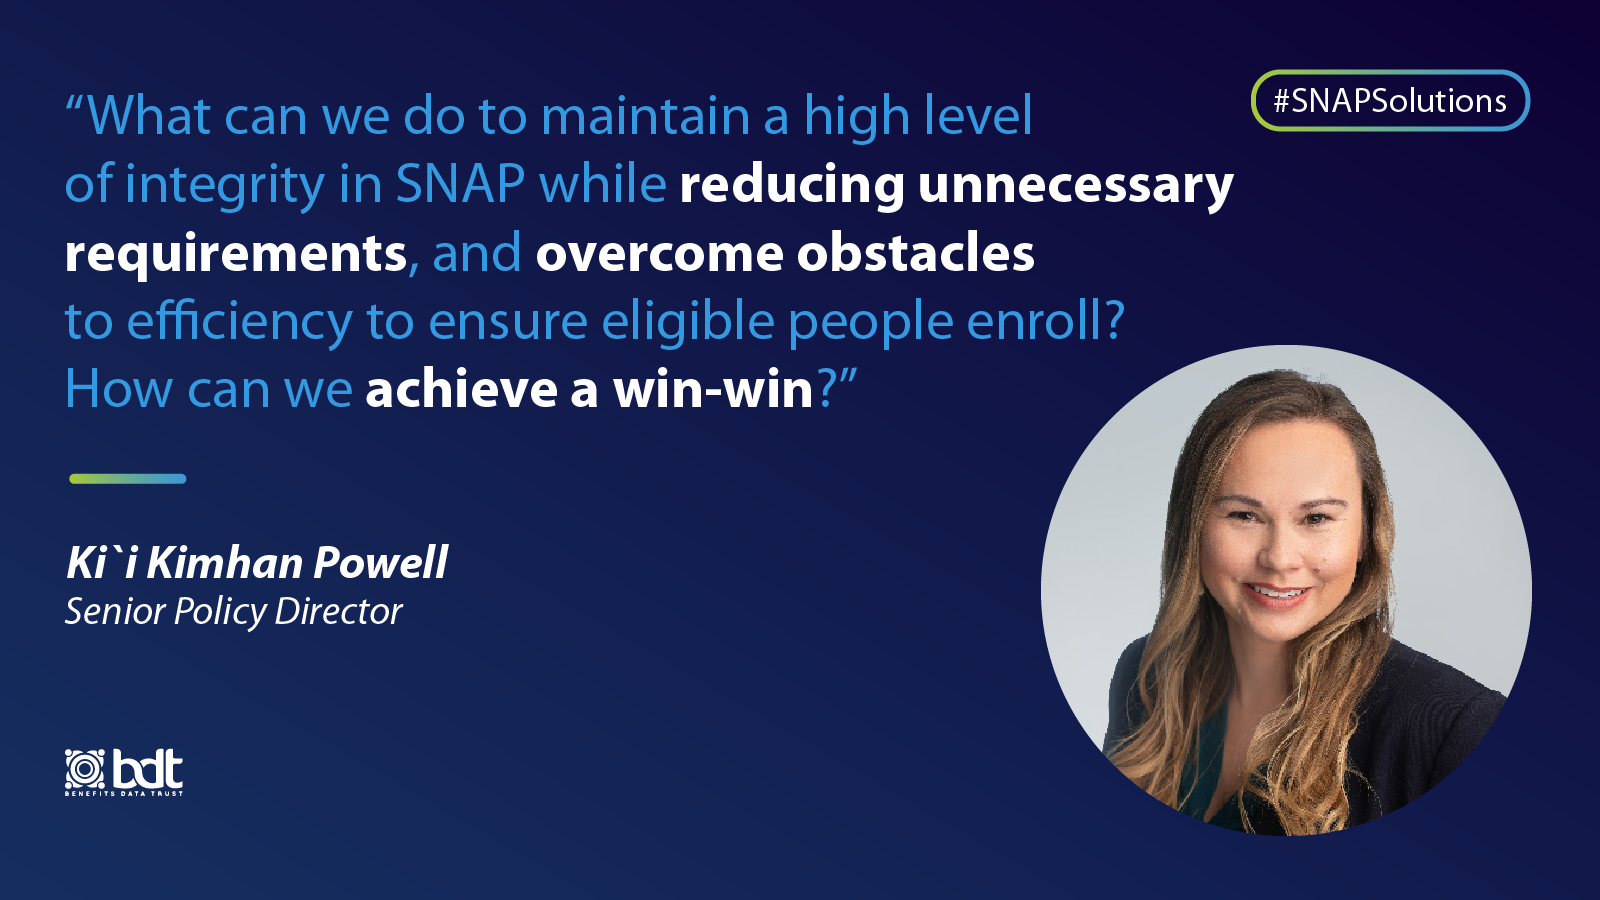 "What can we do to maintain a high level of integrity in SNAP while reducing unnecessary requirements, and overcome obstacles to efficiency to ensure eligible people enroll? How can we achieve a win-win?" - Kii Kimhan Powell